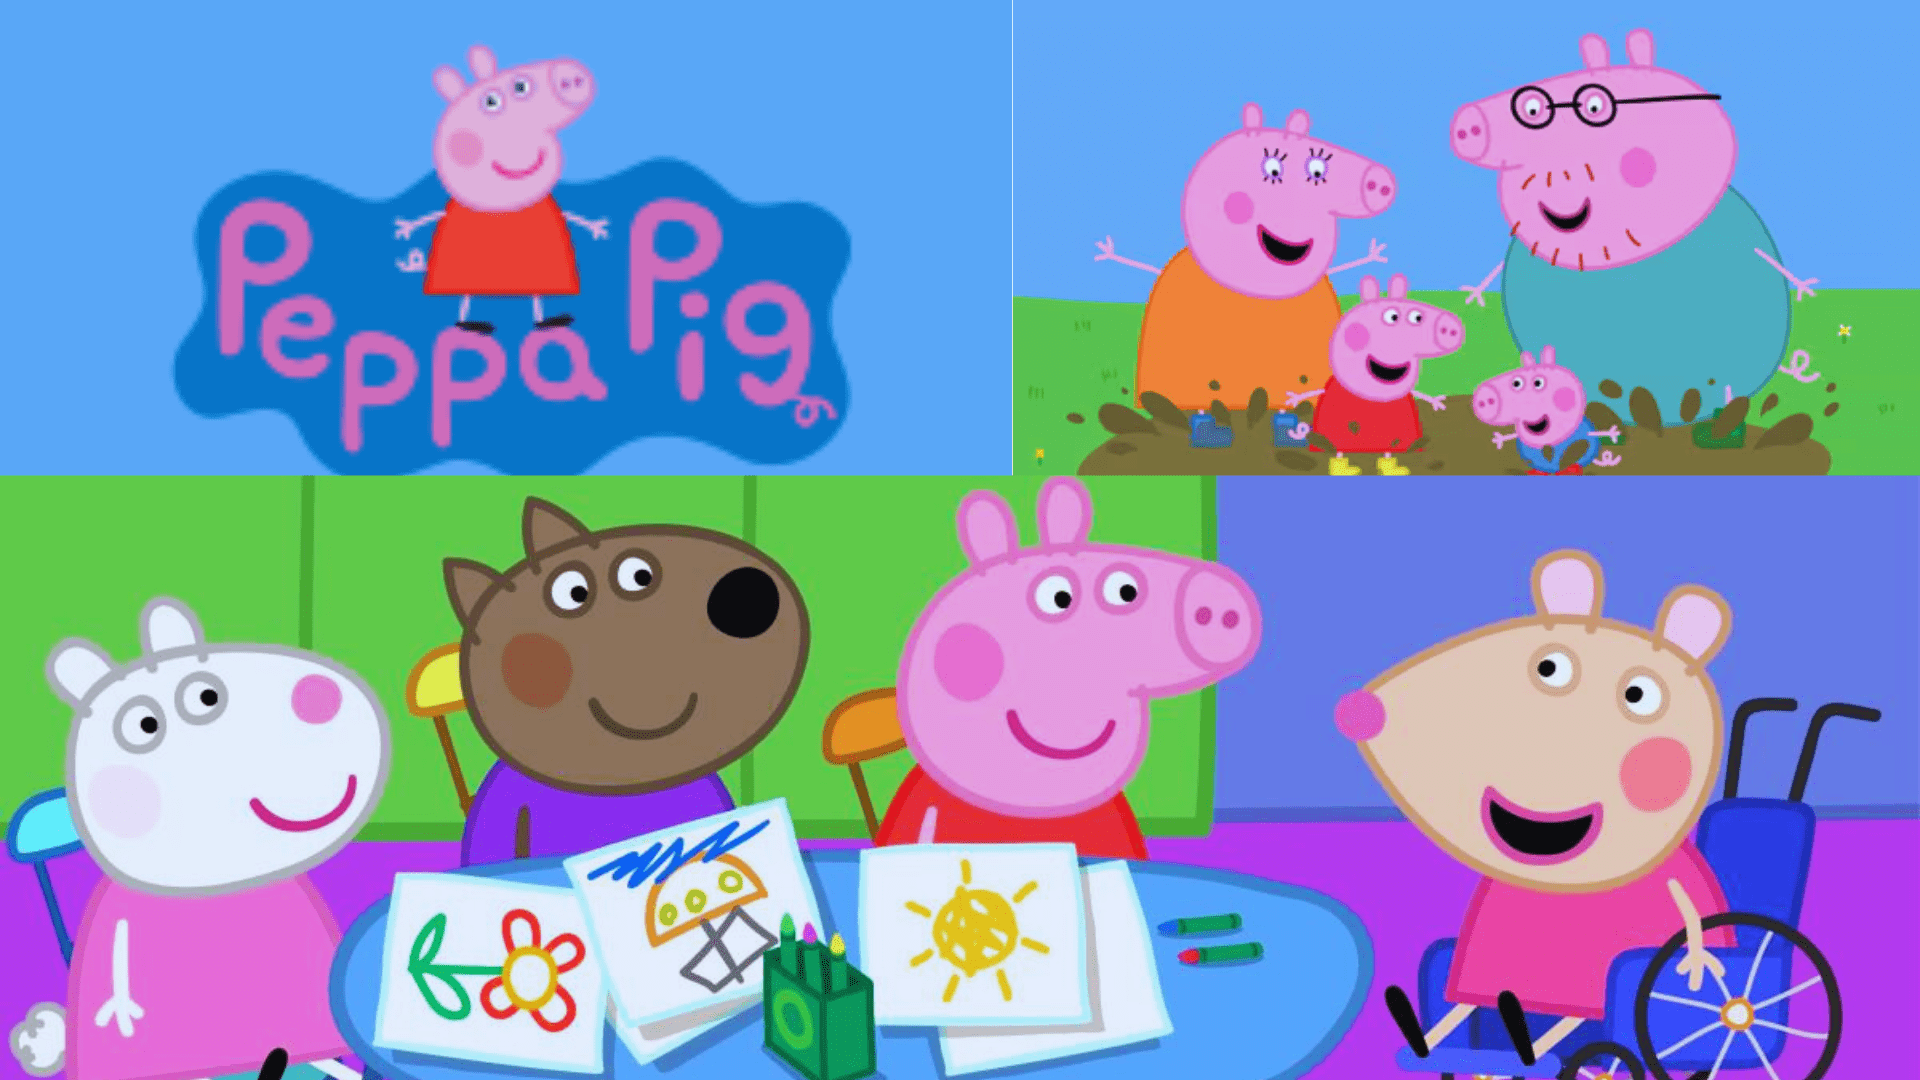 Who Started Racism in Peppa Pig